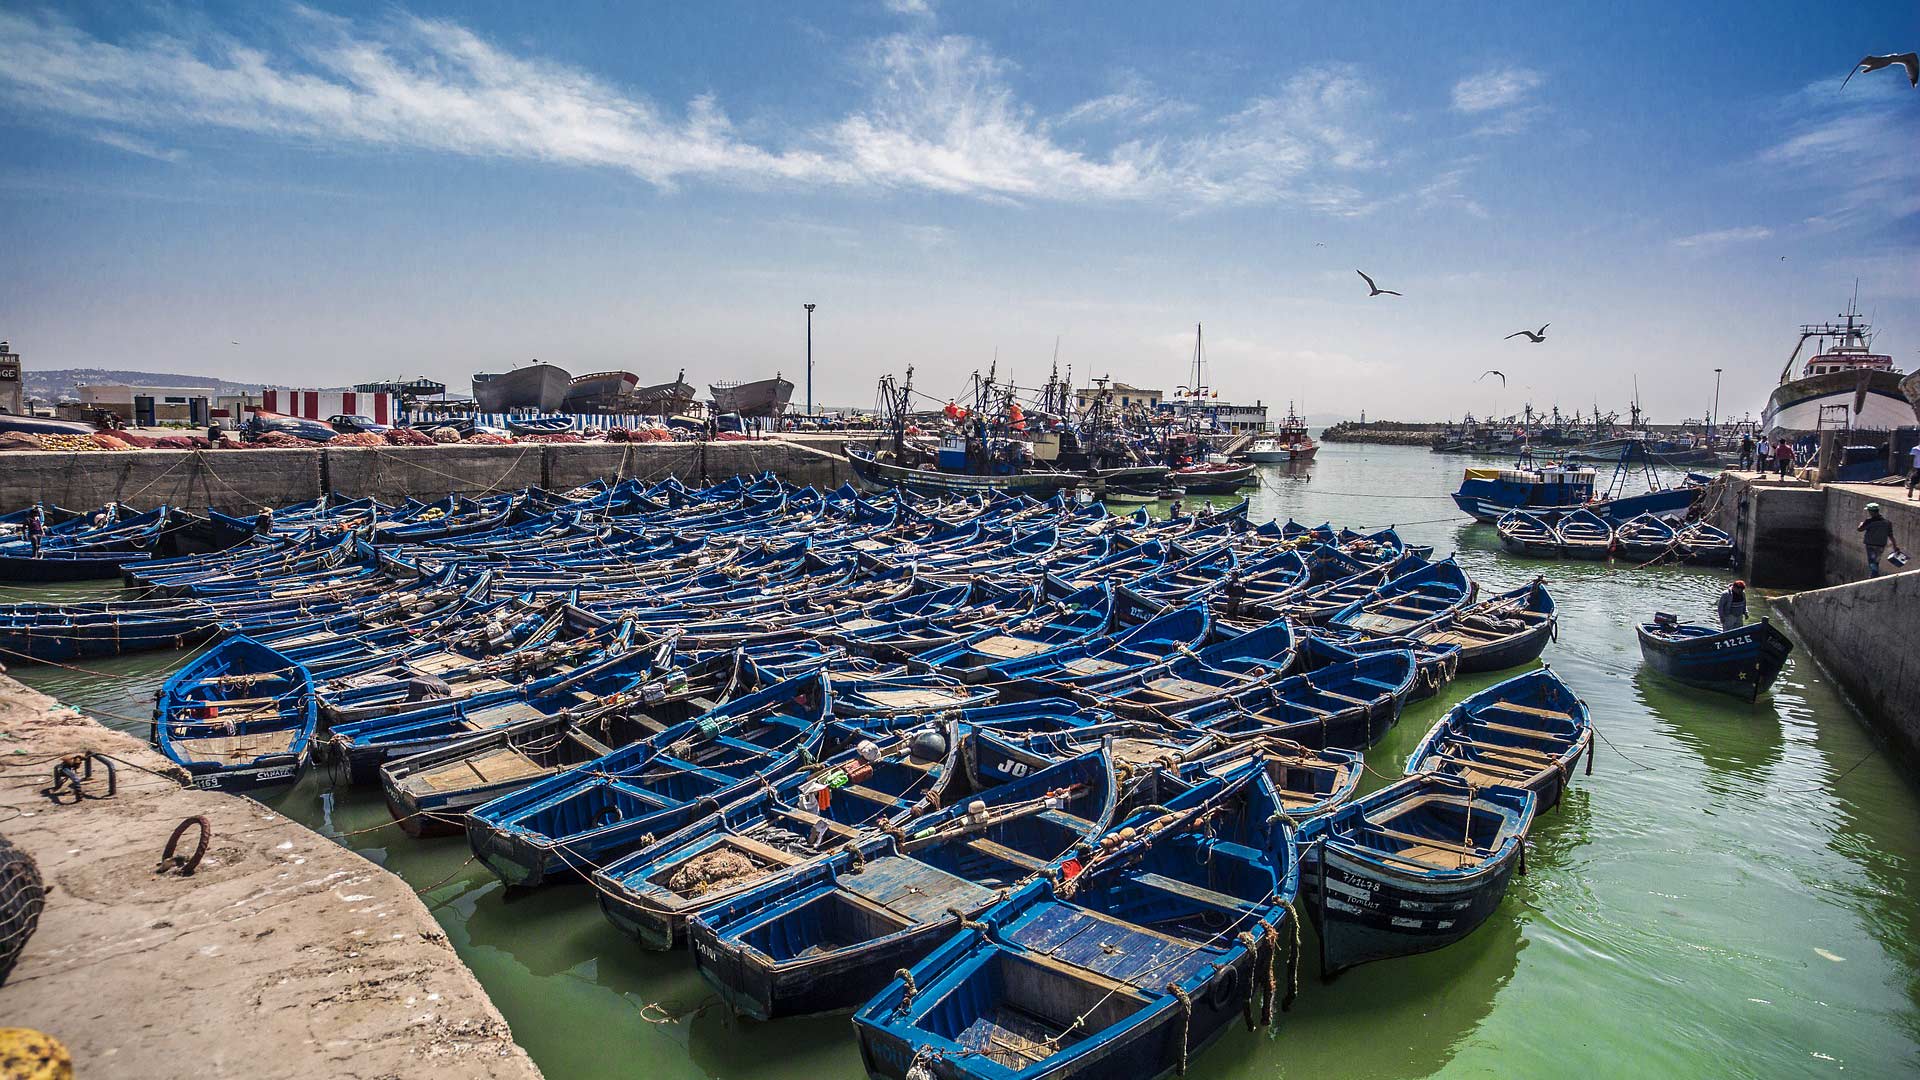 Boats in the port of Essaouira, Morocco.